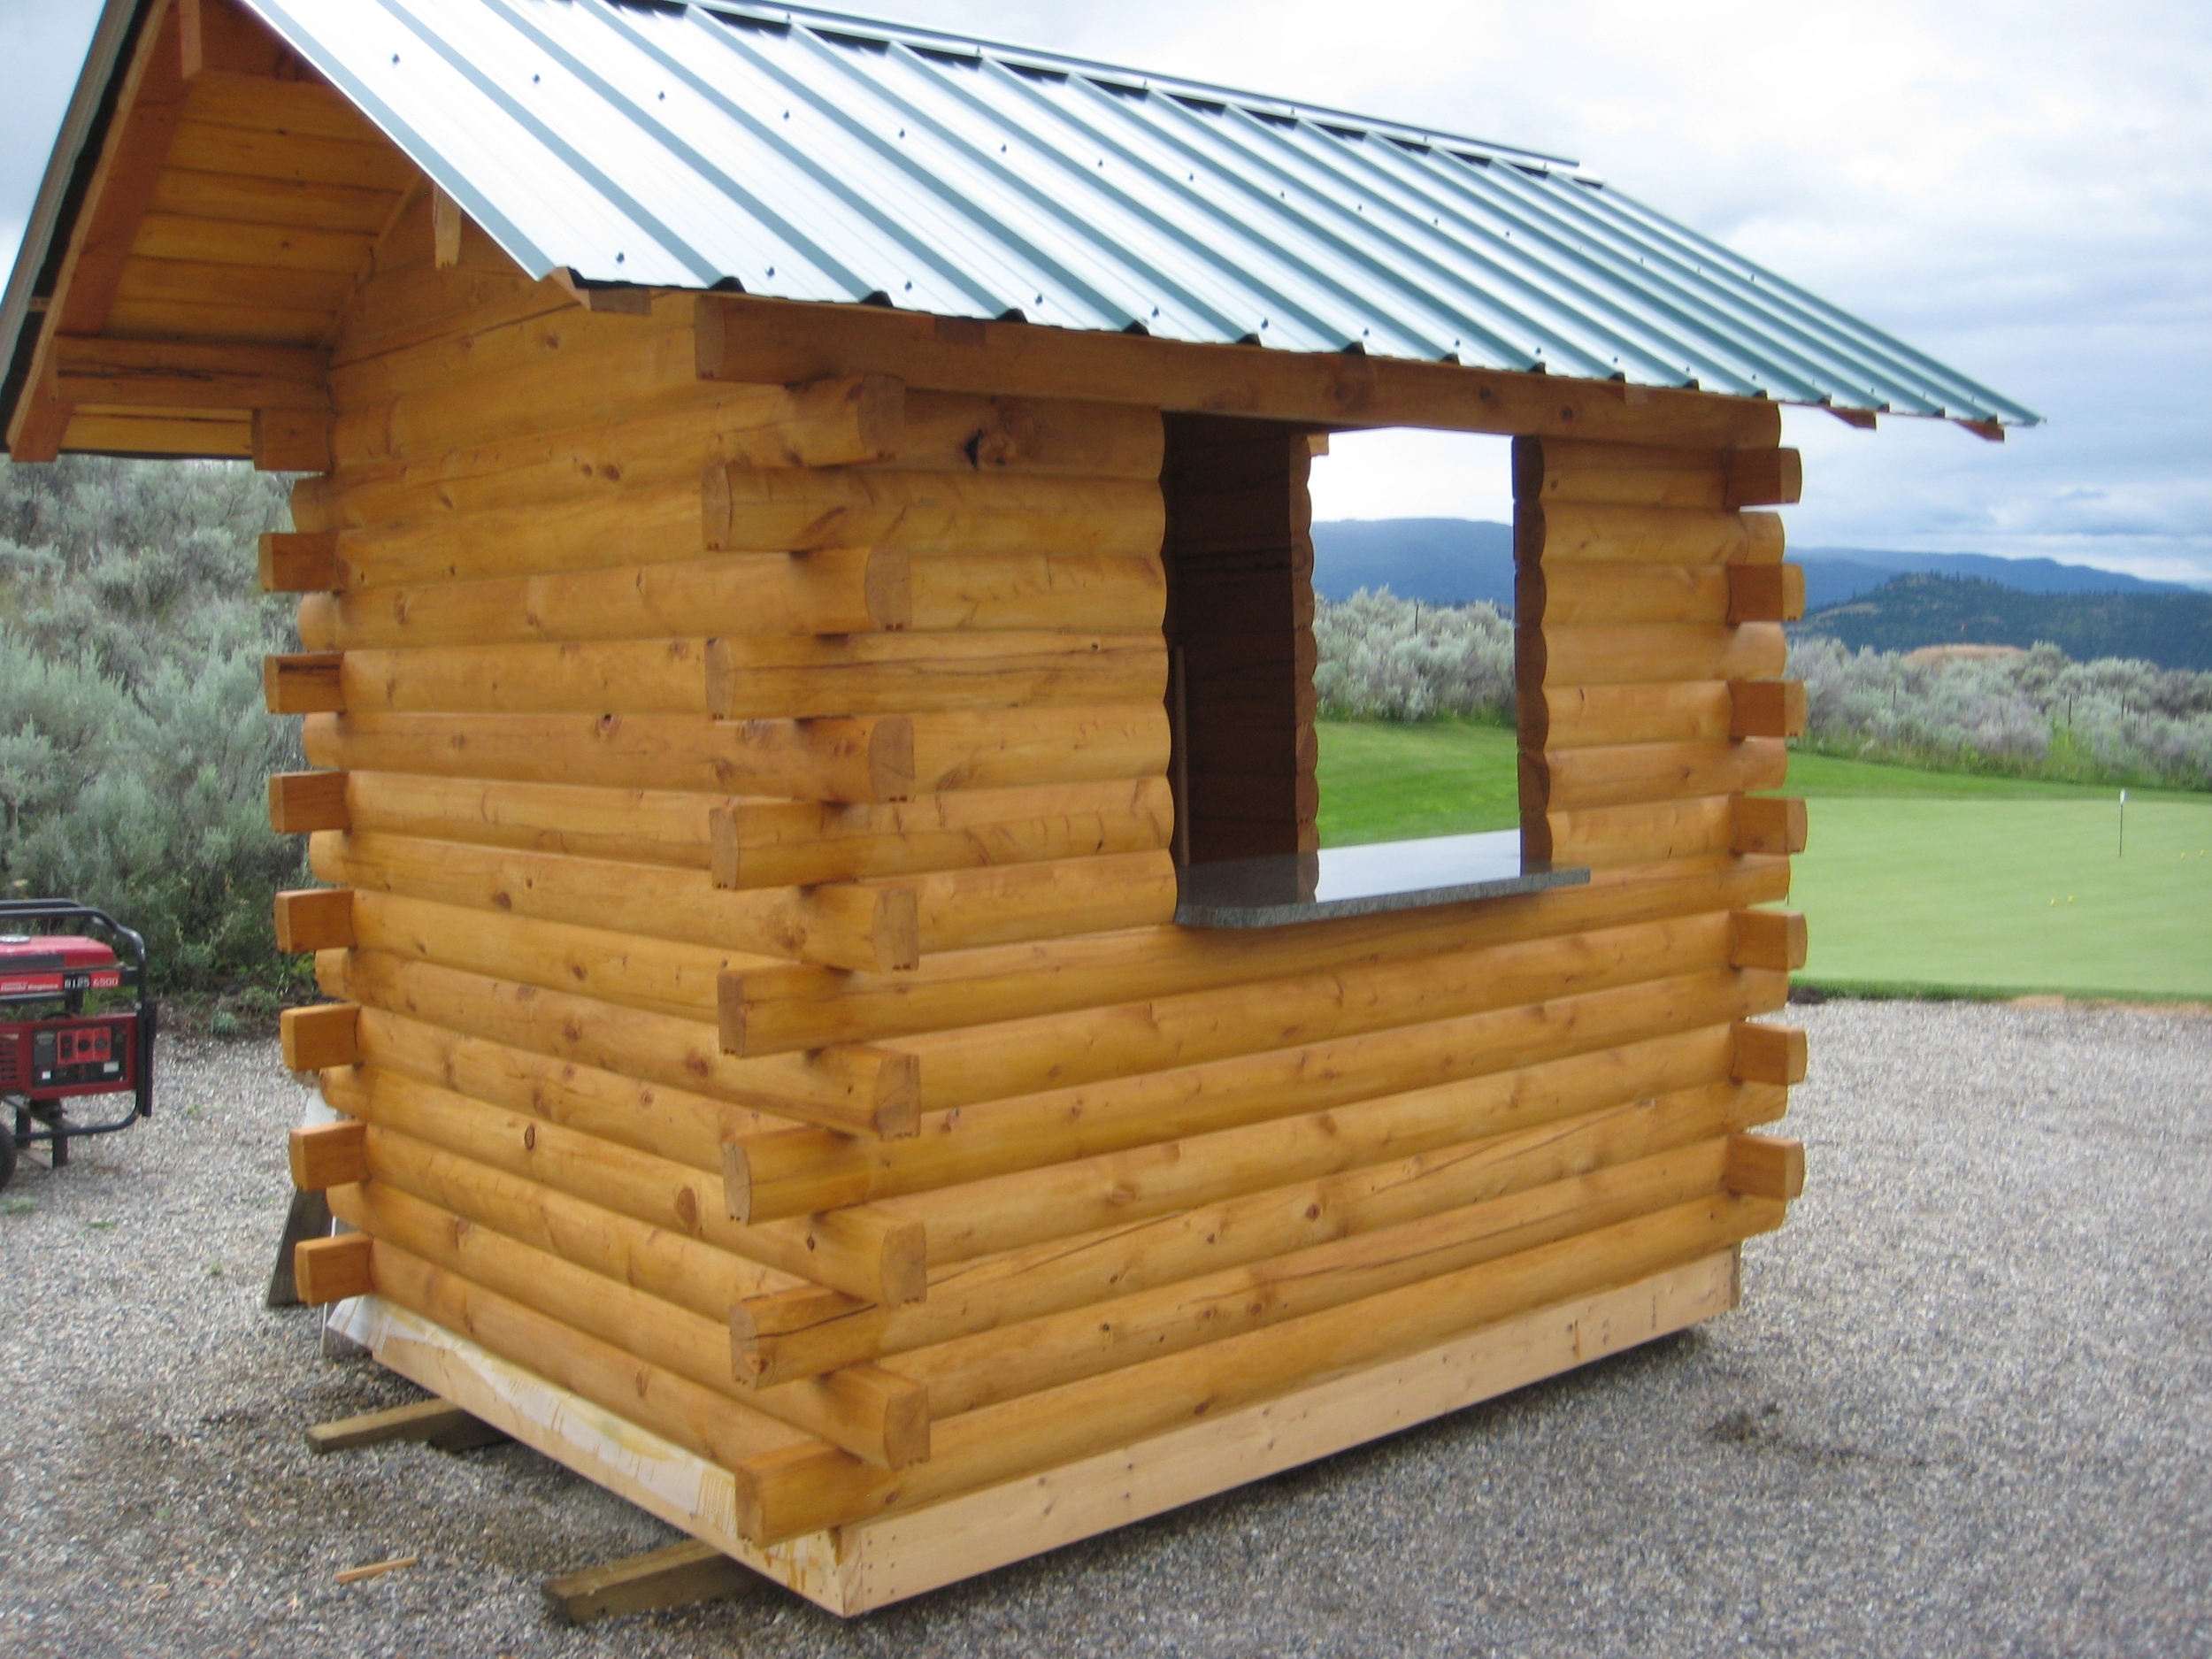  Outbuilding at "The Rise" Golf Course constructed with RB 4x6” Cedar log 